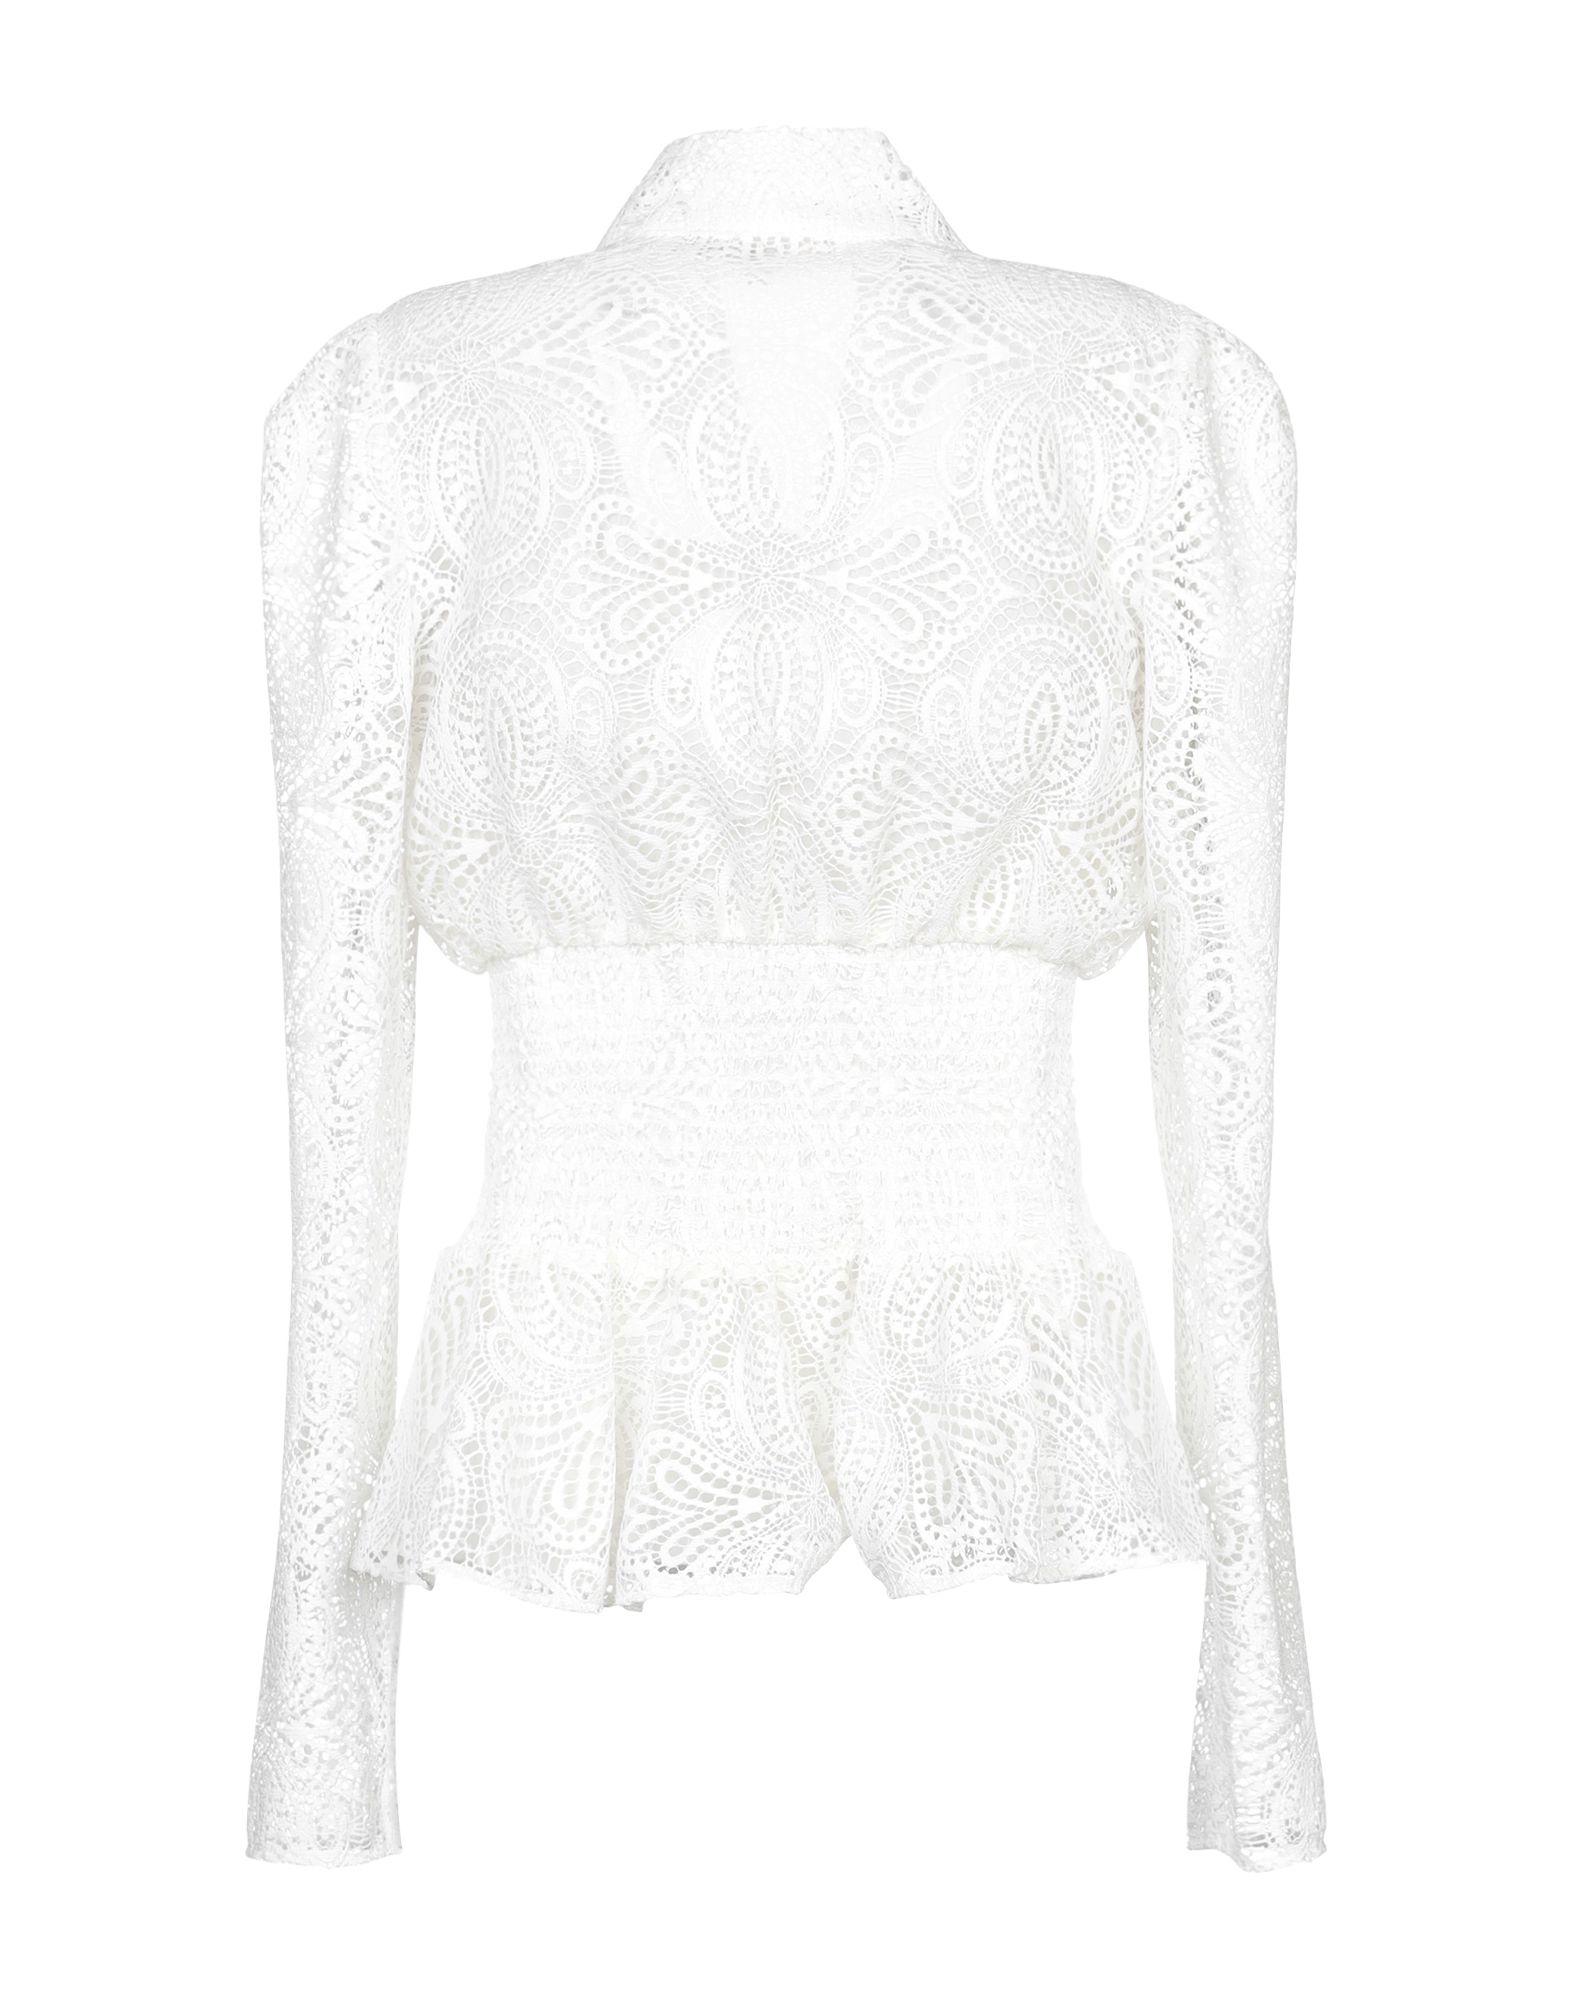 Maje Lace Blouse in White - Lyst